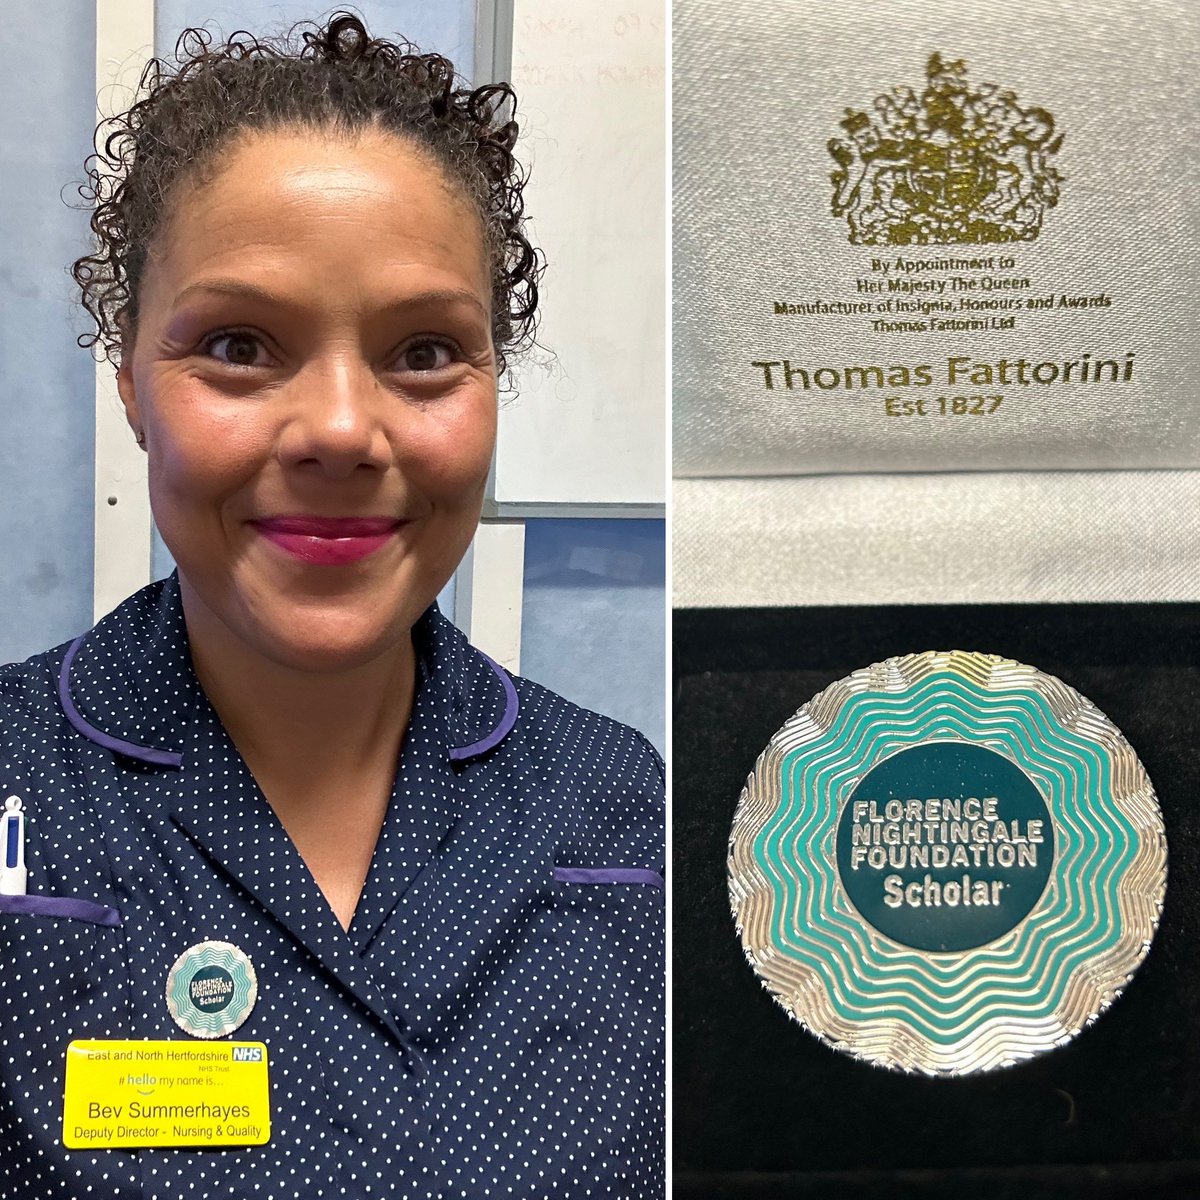 So proud to wear my @FNightingaleF scholars badge for the 1st time today. Thank you to the brilliant team for all your hard work to make the journey feasible. It’s been amazing 🌟 🌟🌟@westwood_greta @GemmaStacey10 @LucyBrownFNF @CuriousBecks @JessLSainsbury @jen_cag @janelennon